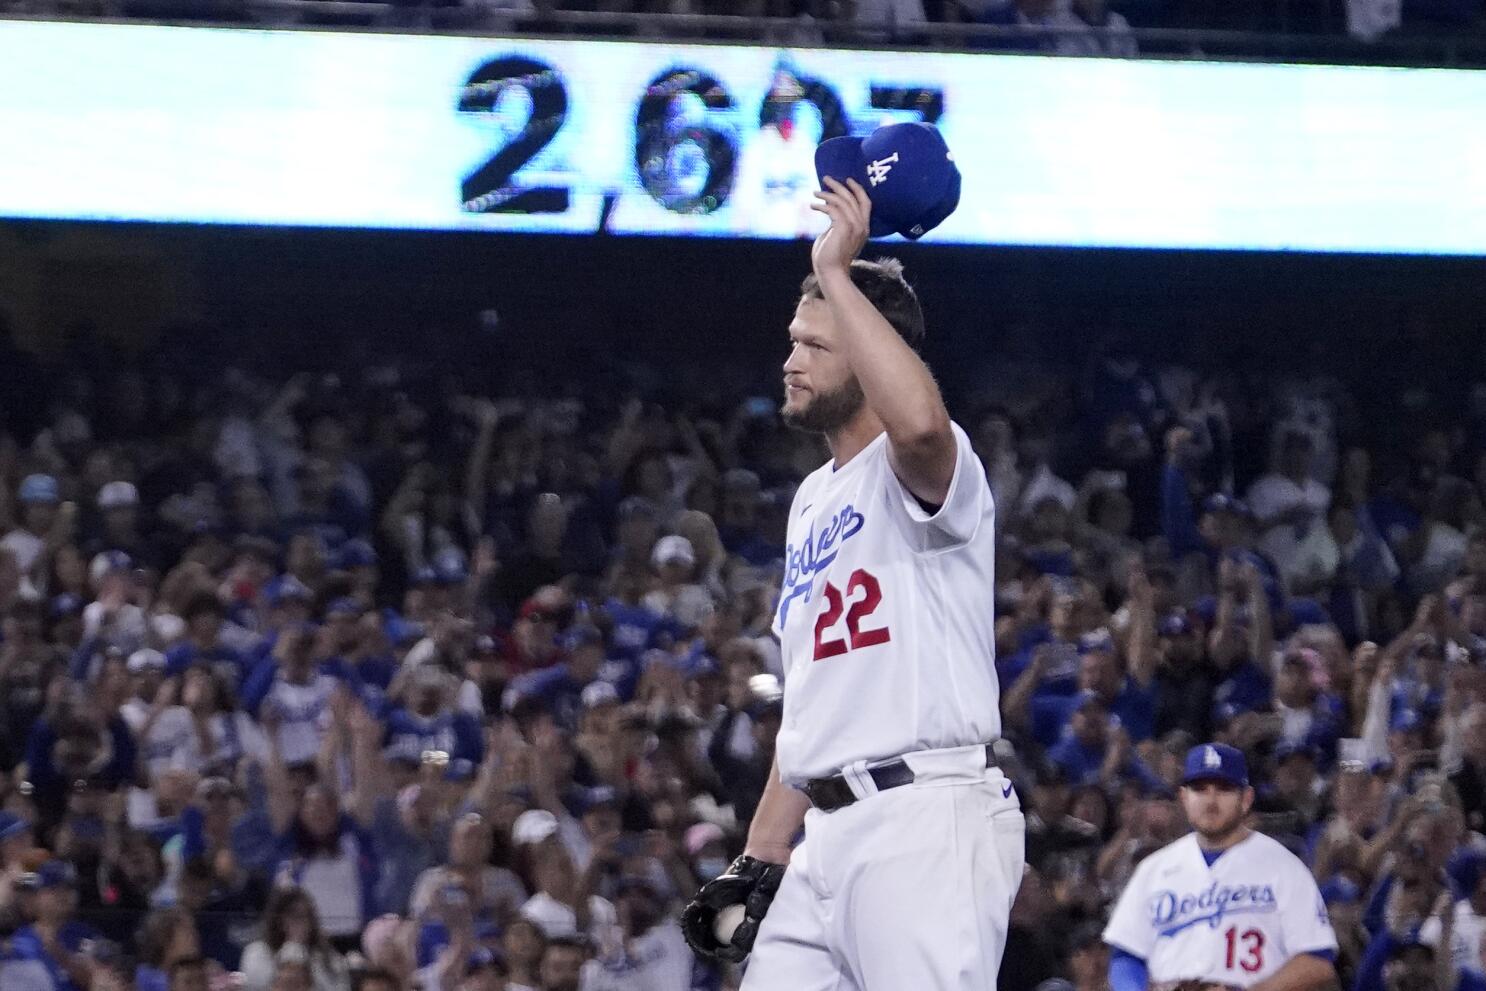 Clayton Kershaw Breaks MLB Record With Most Strikeouts In